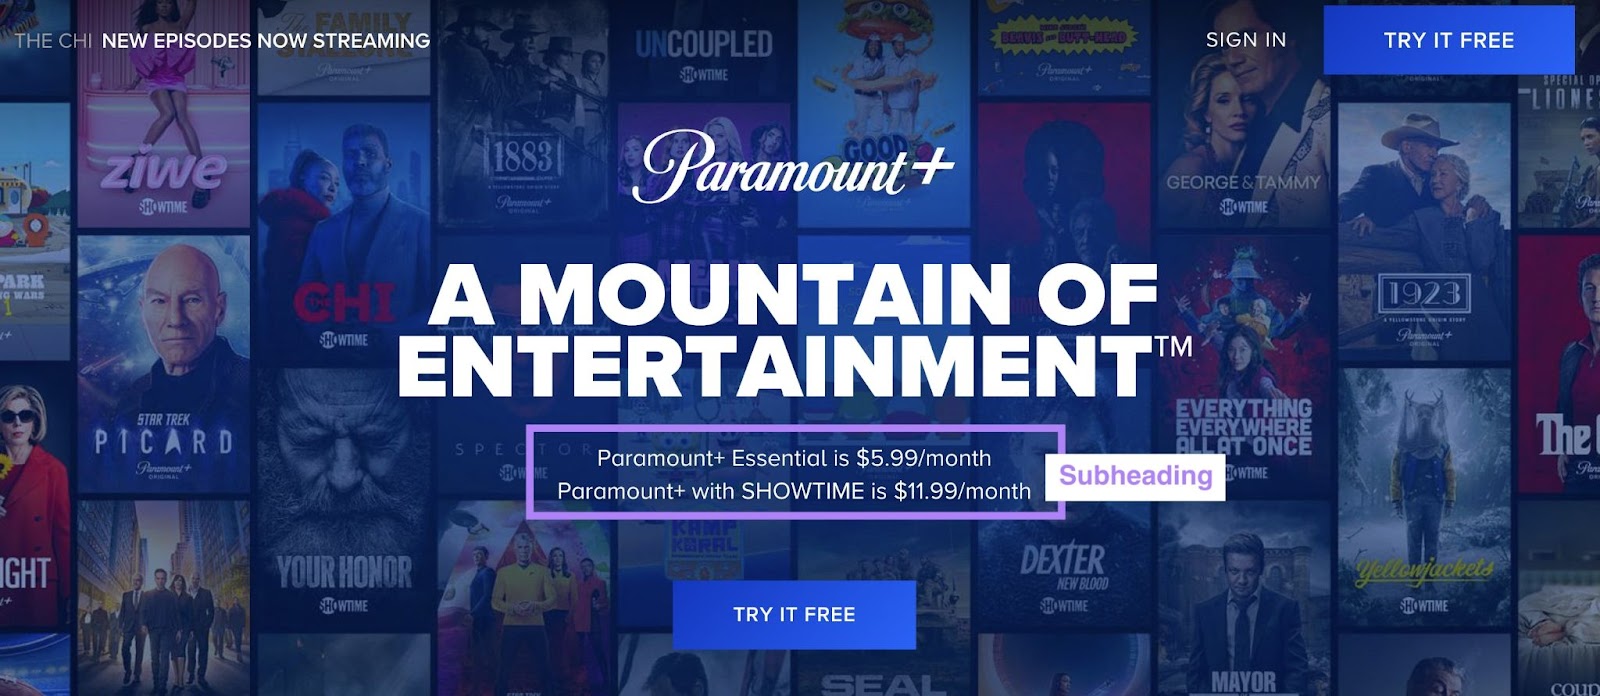 Paramount landing page with pricing option subheading highlighted on a background of TV show graphics